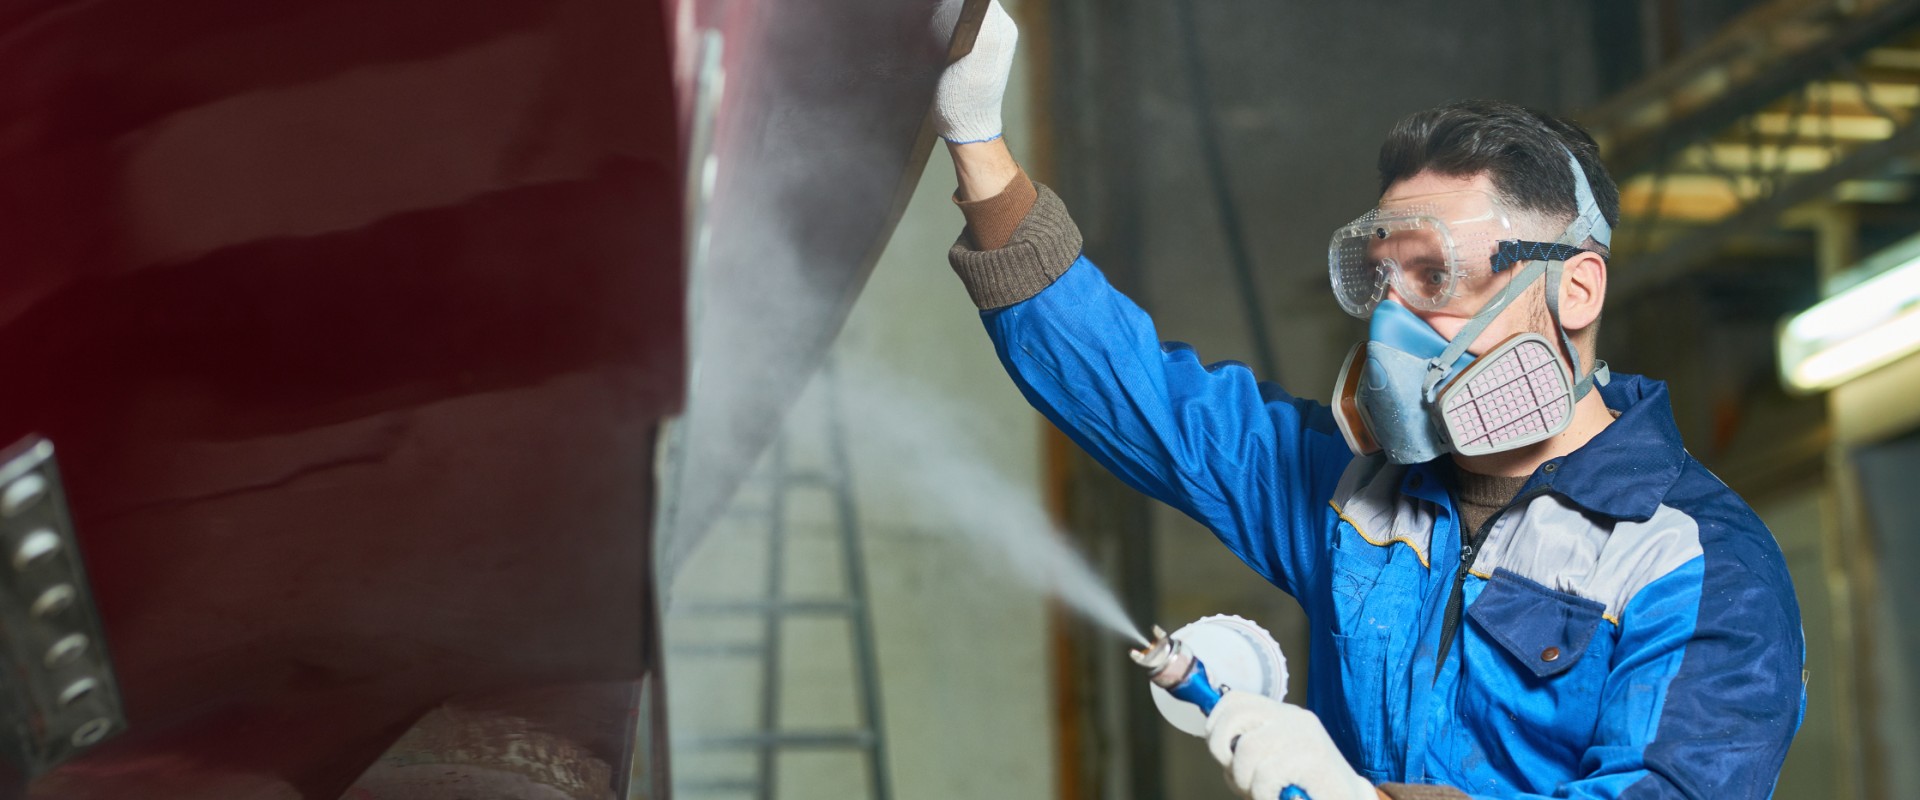 What is painters protective gear?